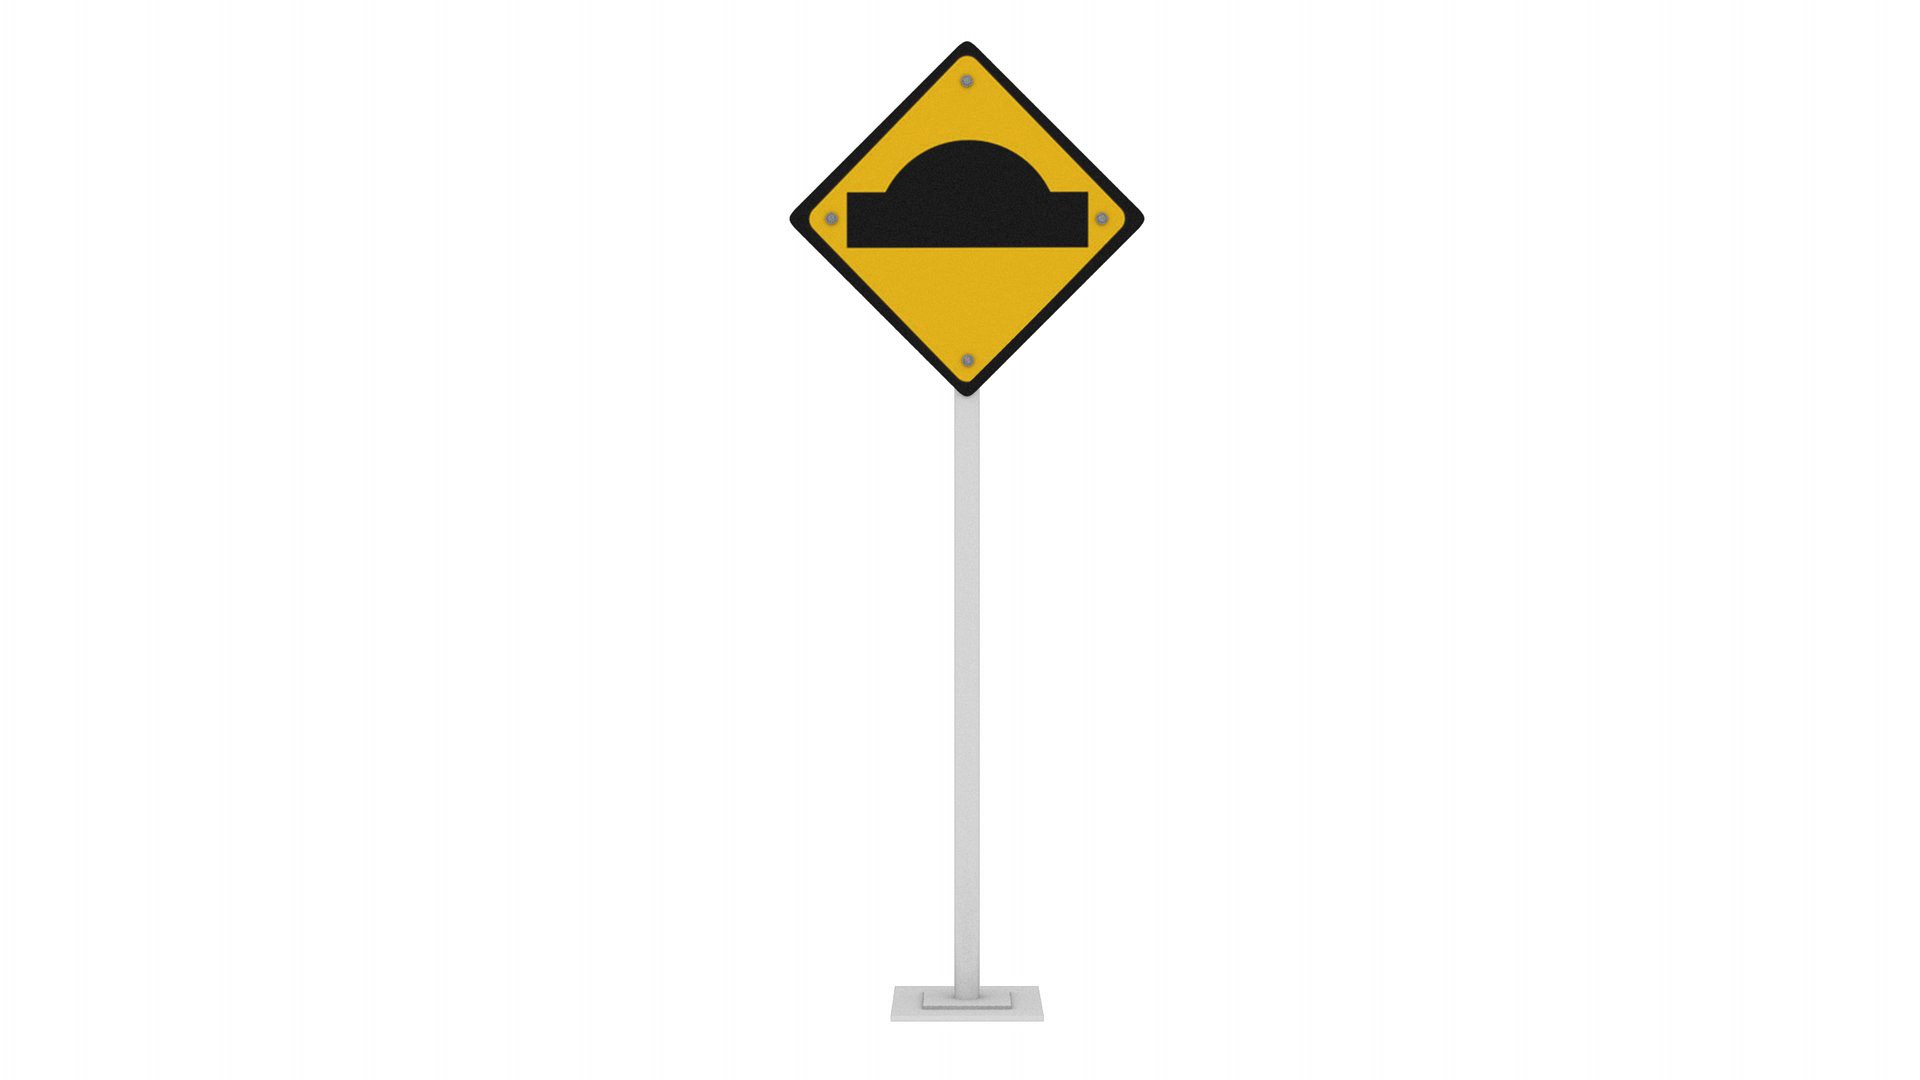 Obstacle [road signal]